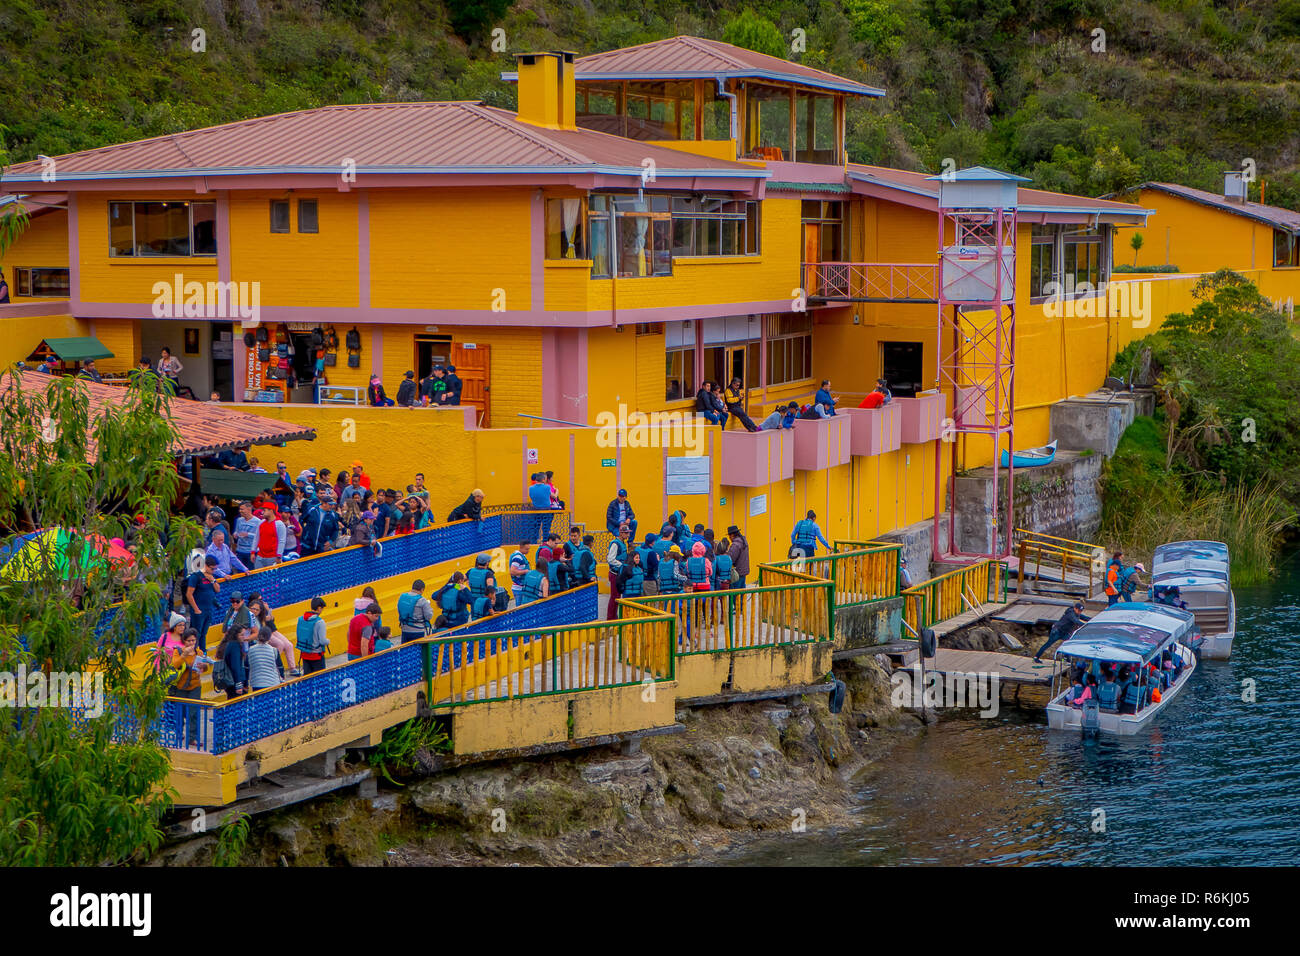 CUICOCHA, ECUADOR, NOVEMBER 06, 2018: Above view of yellow information building with some tourists boarding a boat to have a tour in the Cuicocha lake Stock Photo